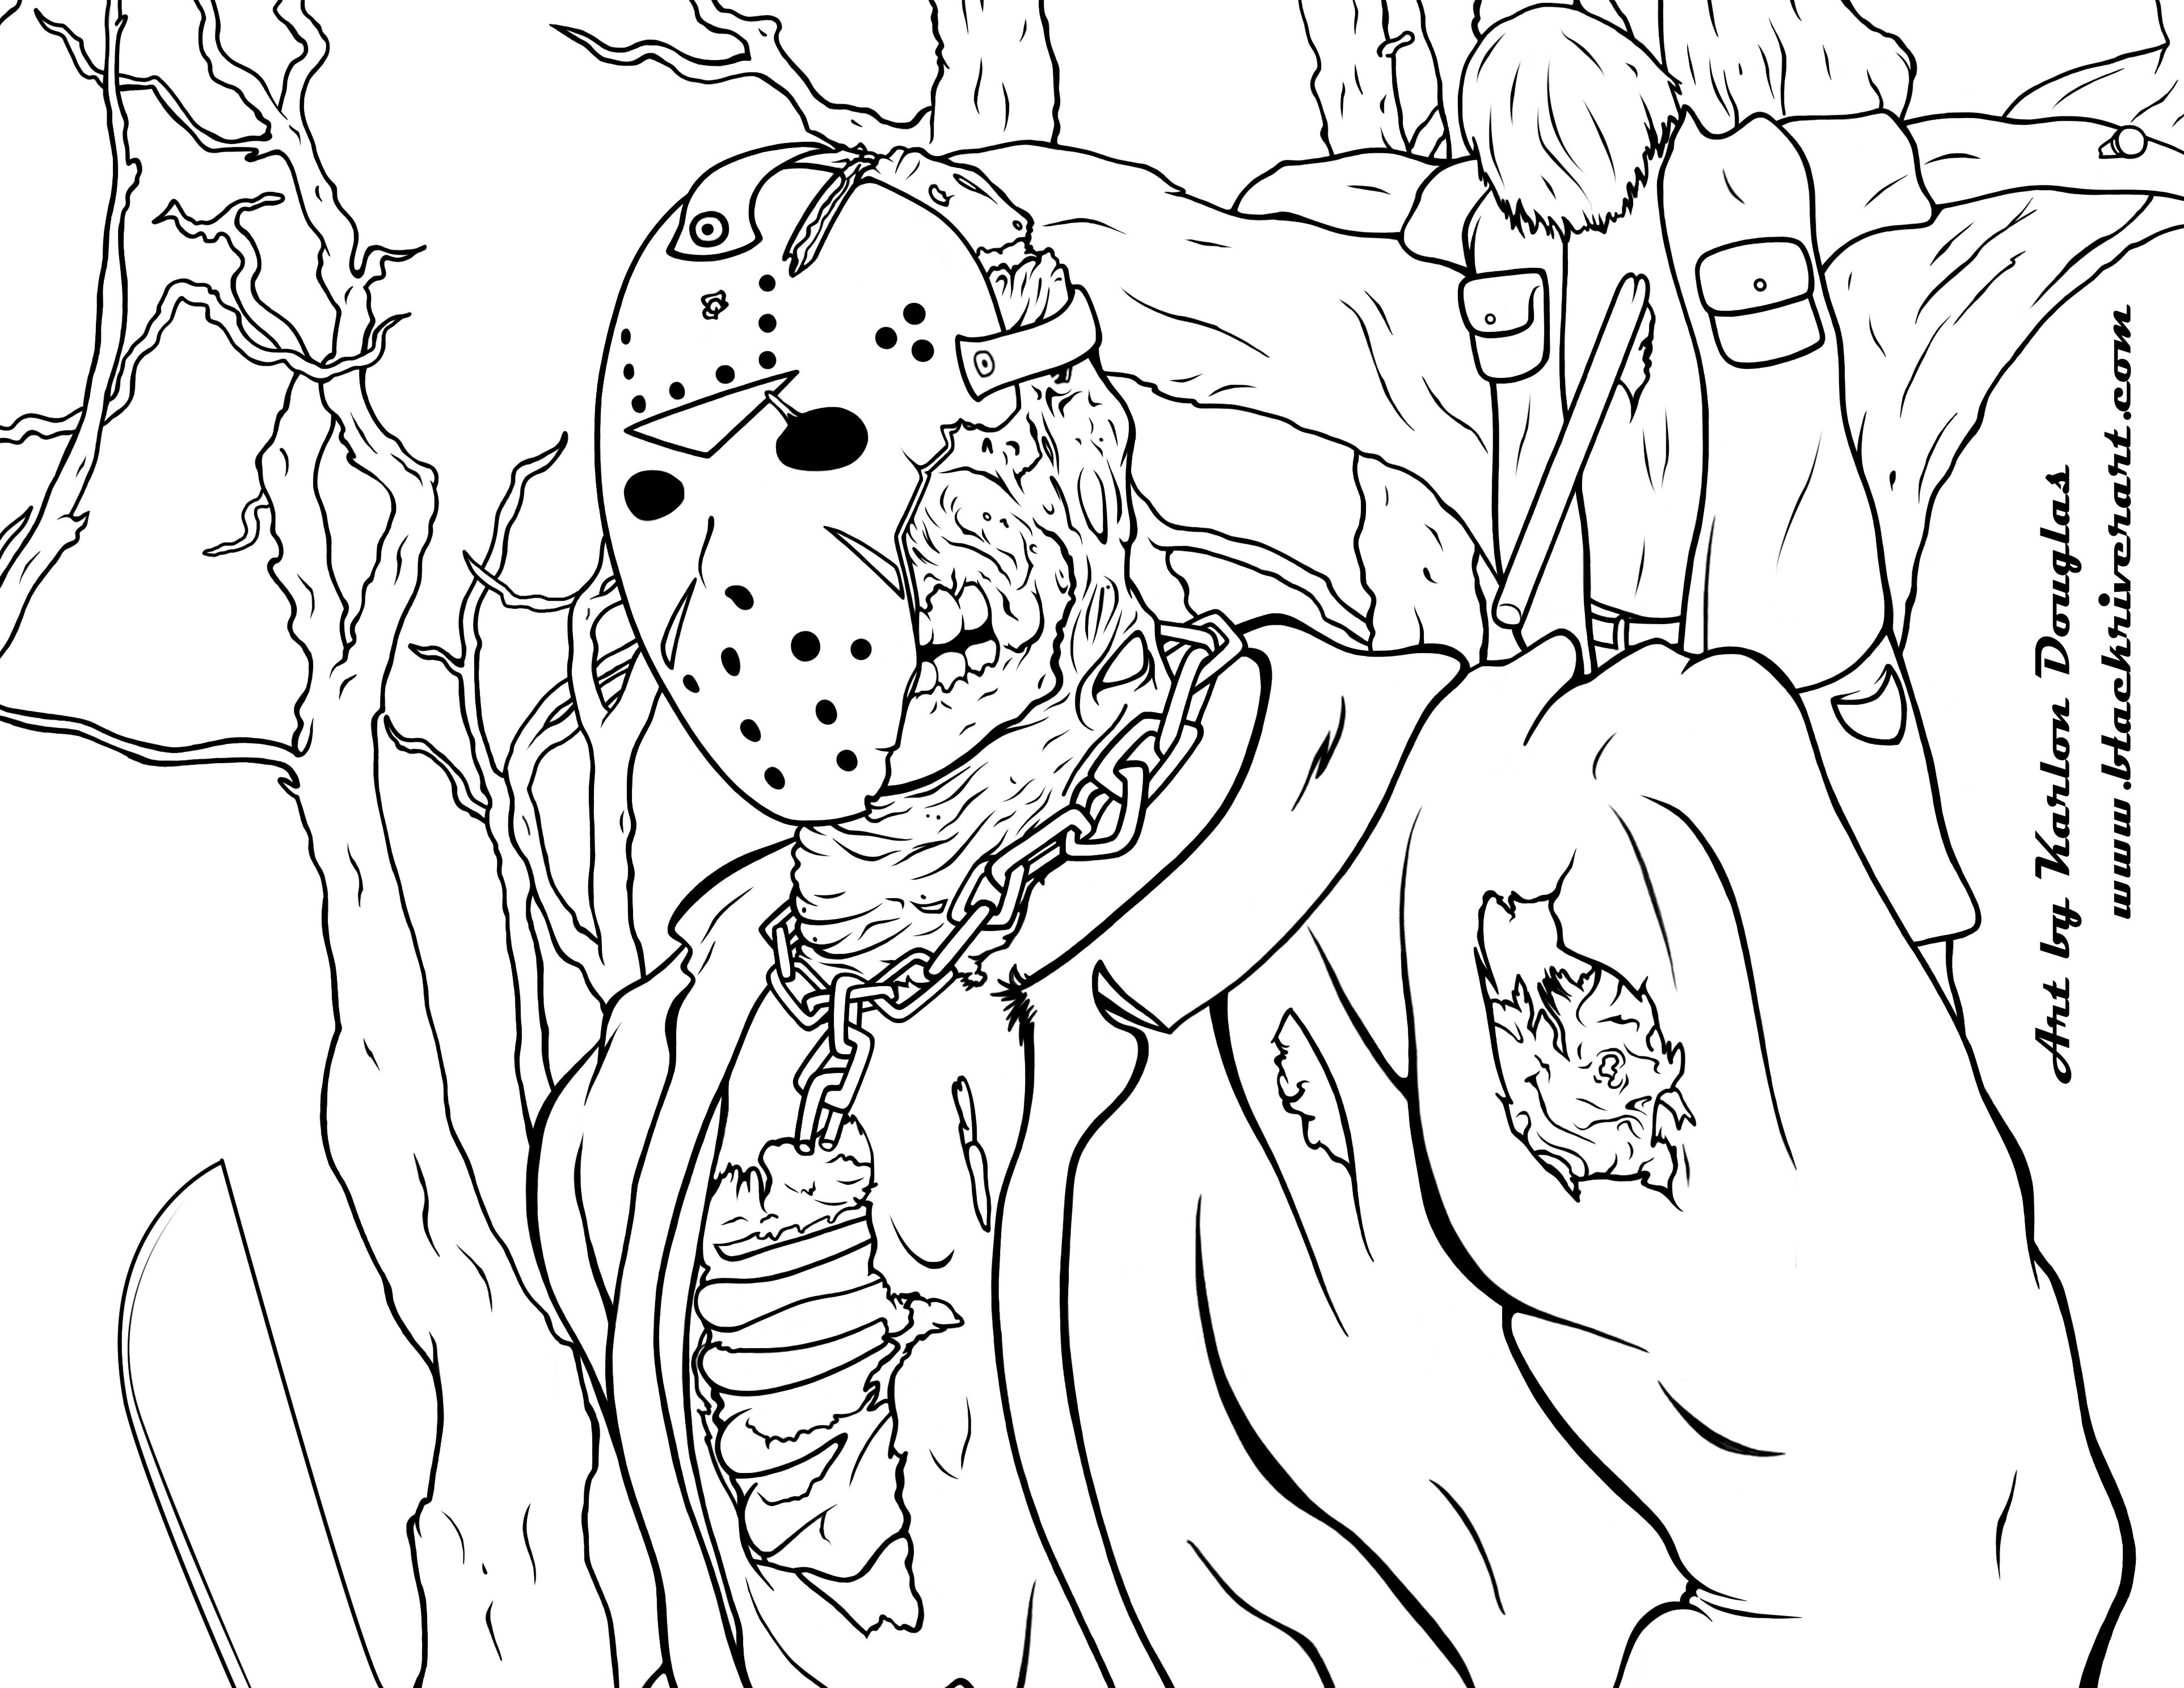 Free Printable Halloween Coloring Pages For Older Kids at ...